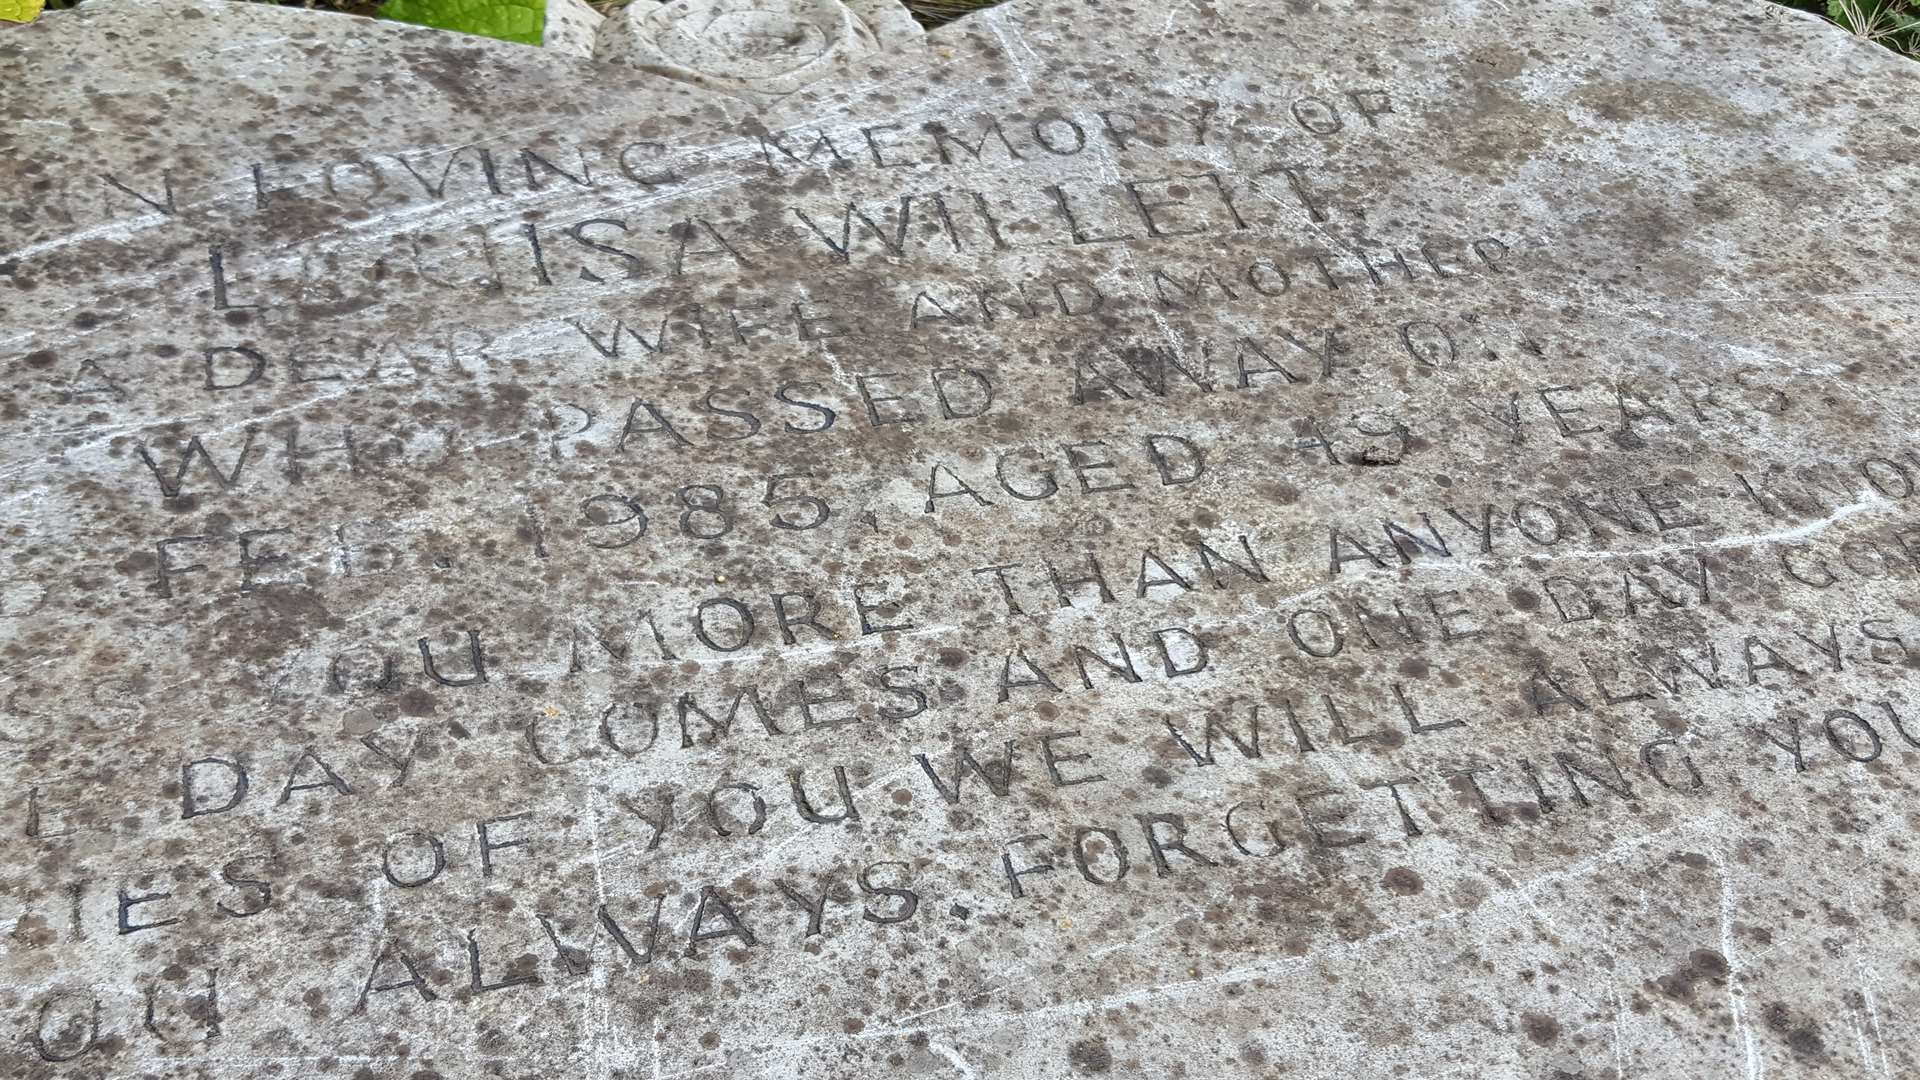 The abandoned gravestone found by Pam Penfold